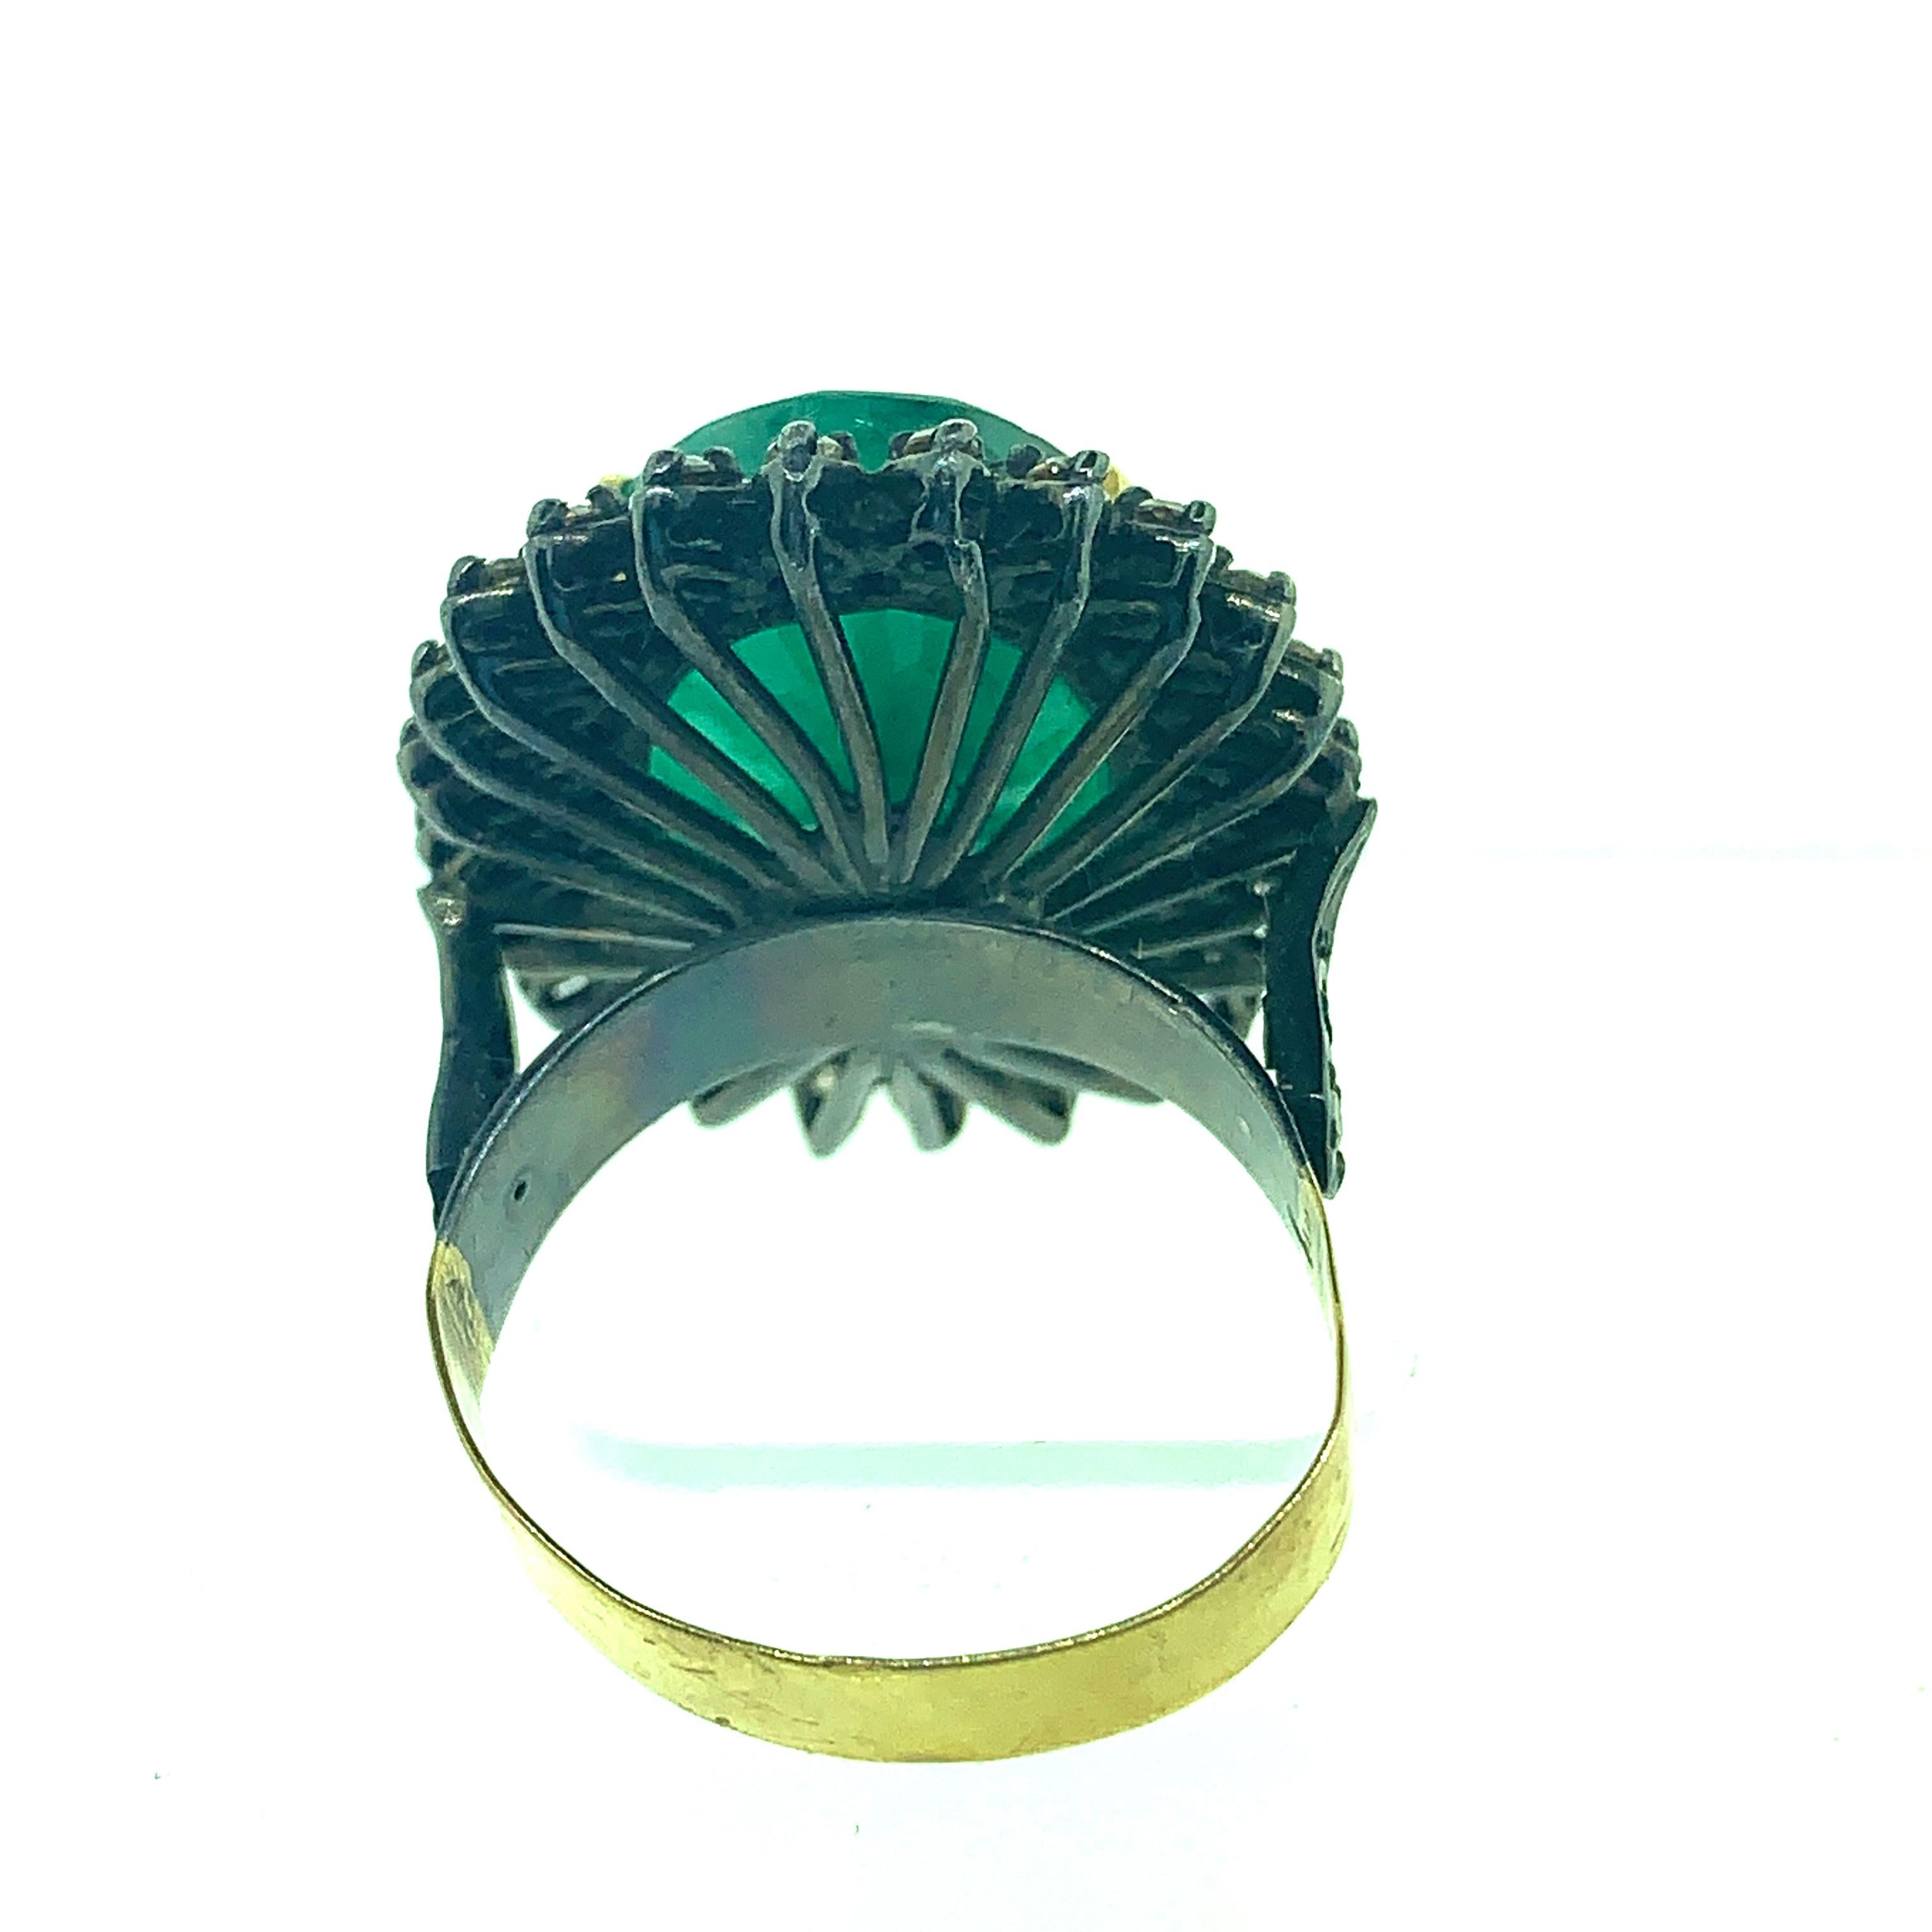 Oval Cut 13.50 Carat Emerald, Diamond Ring in Oxidized Sterling Silver, 18 Karat Gold For Sale